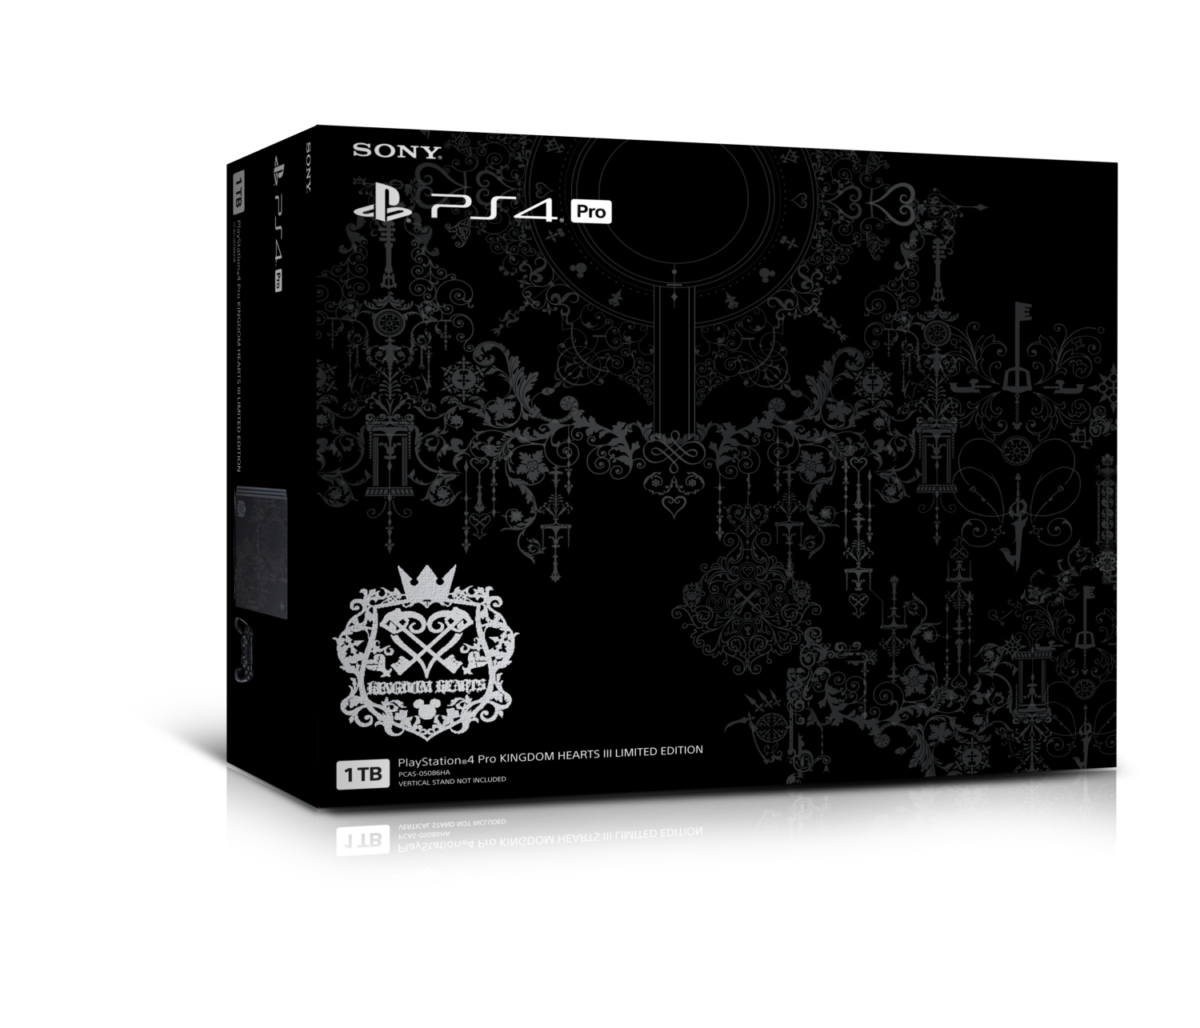 Limited Edition Kingdom Hearts 3 Ps4 Pro To Be Released In The Philippines